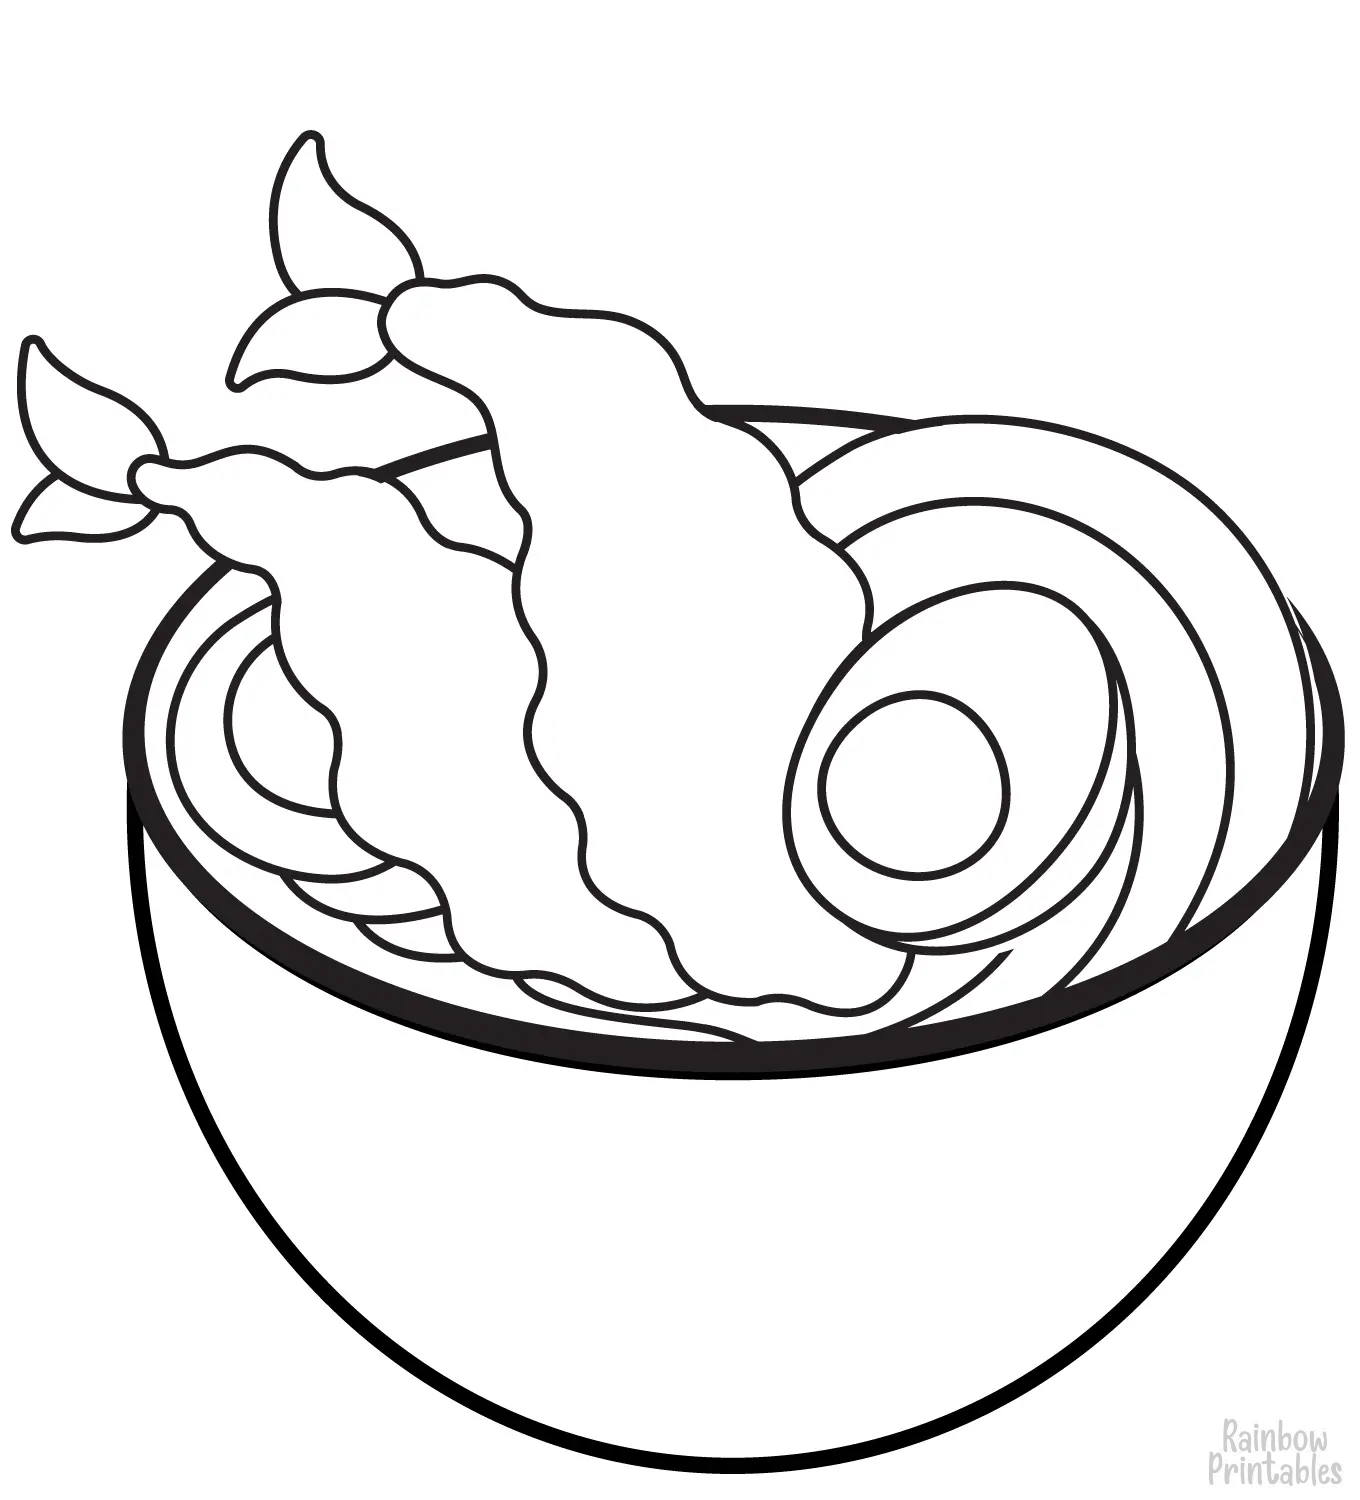 JAPANESE FOOD UDON NOODLE SOUP TEMPURA BOWL Clipart Coloring Pages Line Art Drawings for Kids-01